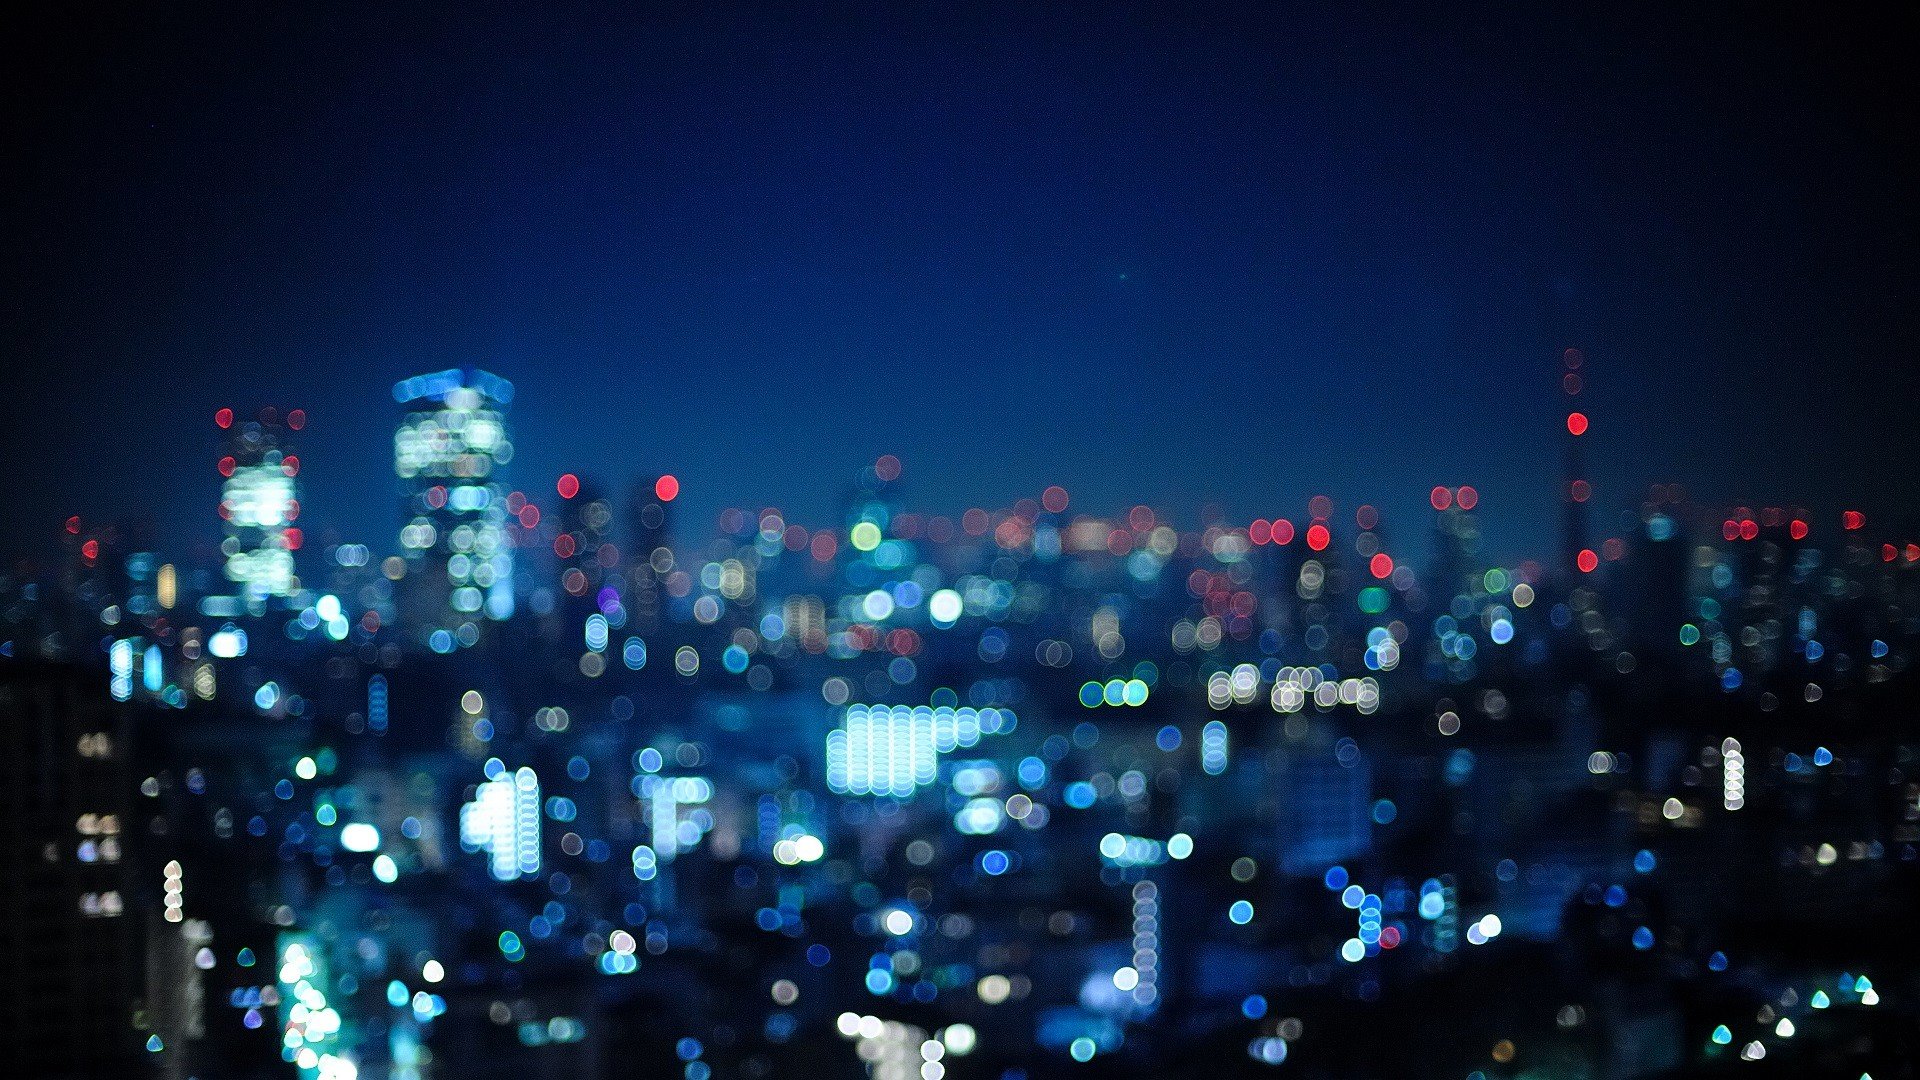 City Cityscape Lights City Lights Blurred Wallpapers Hd Desktop And Mobile Backgrounds 8440